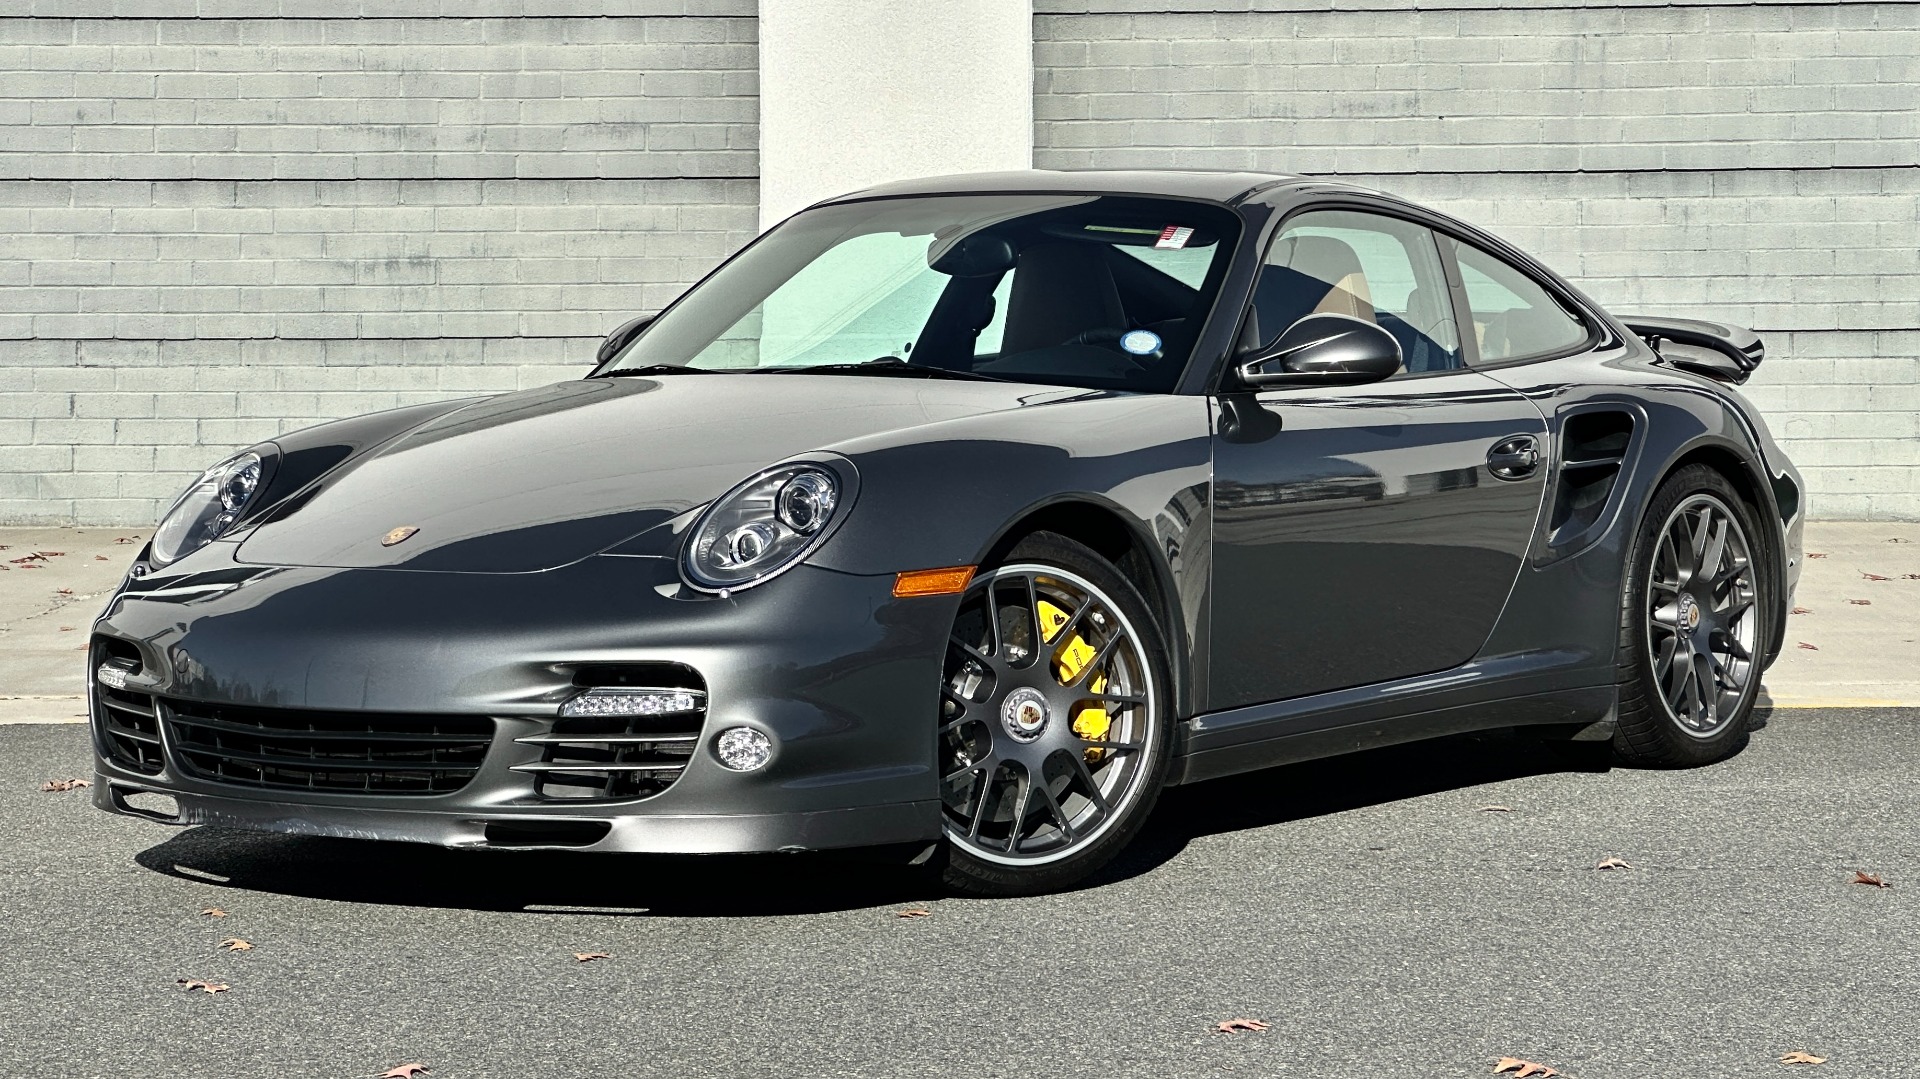 Used 2012 Porsche 911 TURBO S / CENTER LOCK WHEELS / FULL LEATHER INTERIOR / YELLOW CALIPERS / PA for sale $138,999 at Formula Imports in Charlotte NC 28227 1